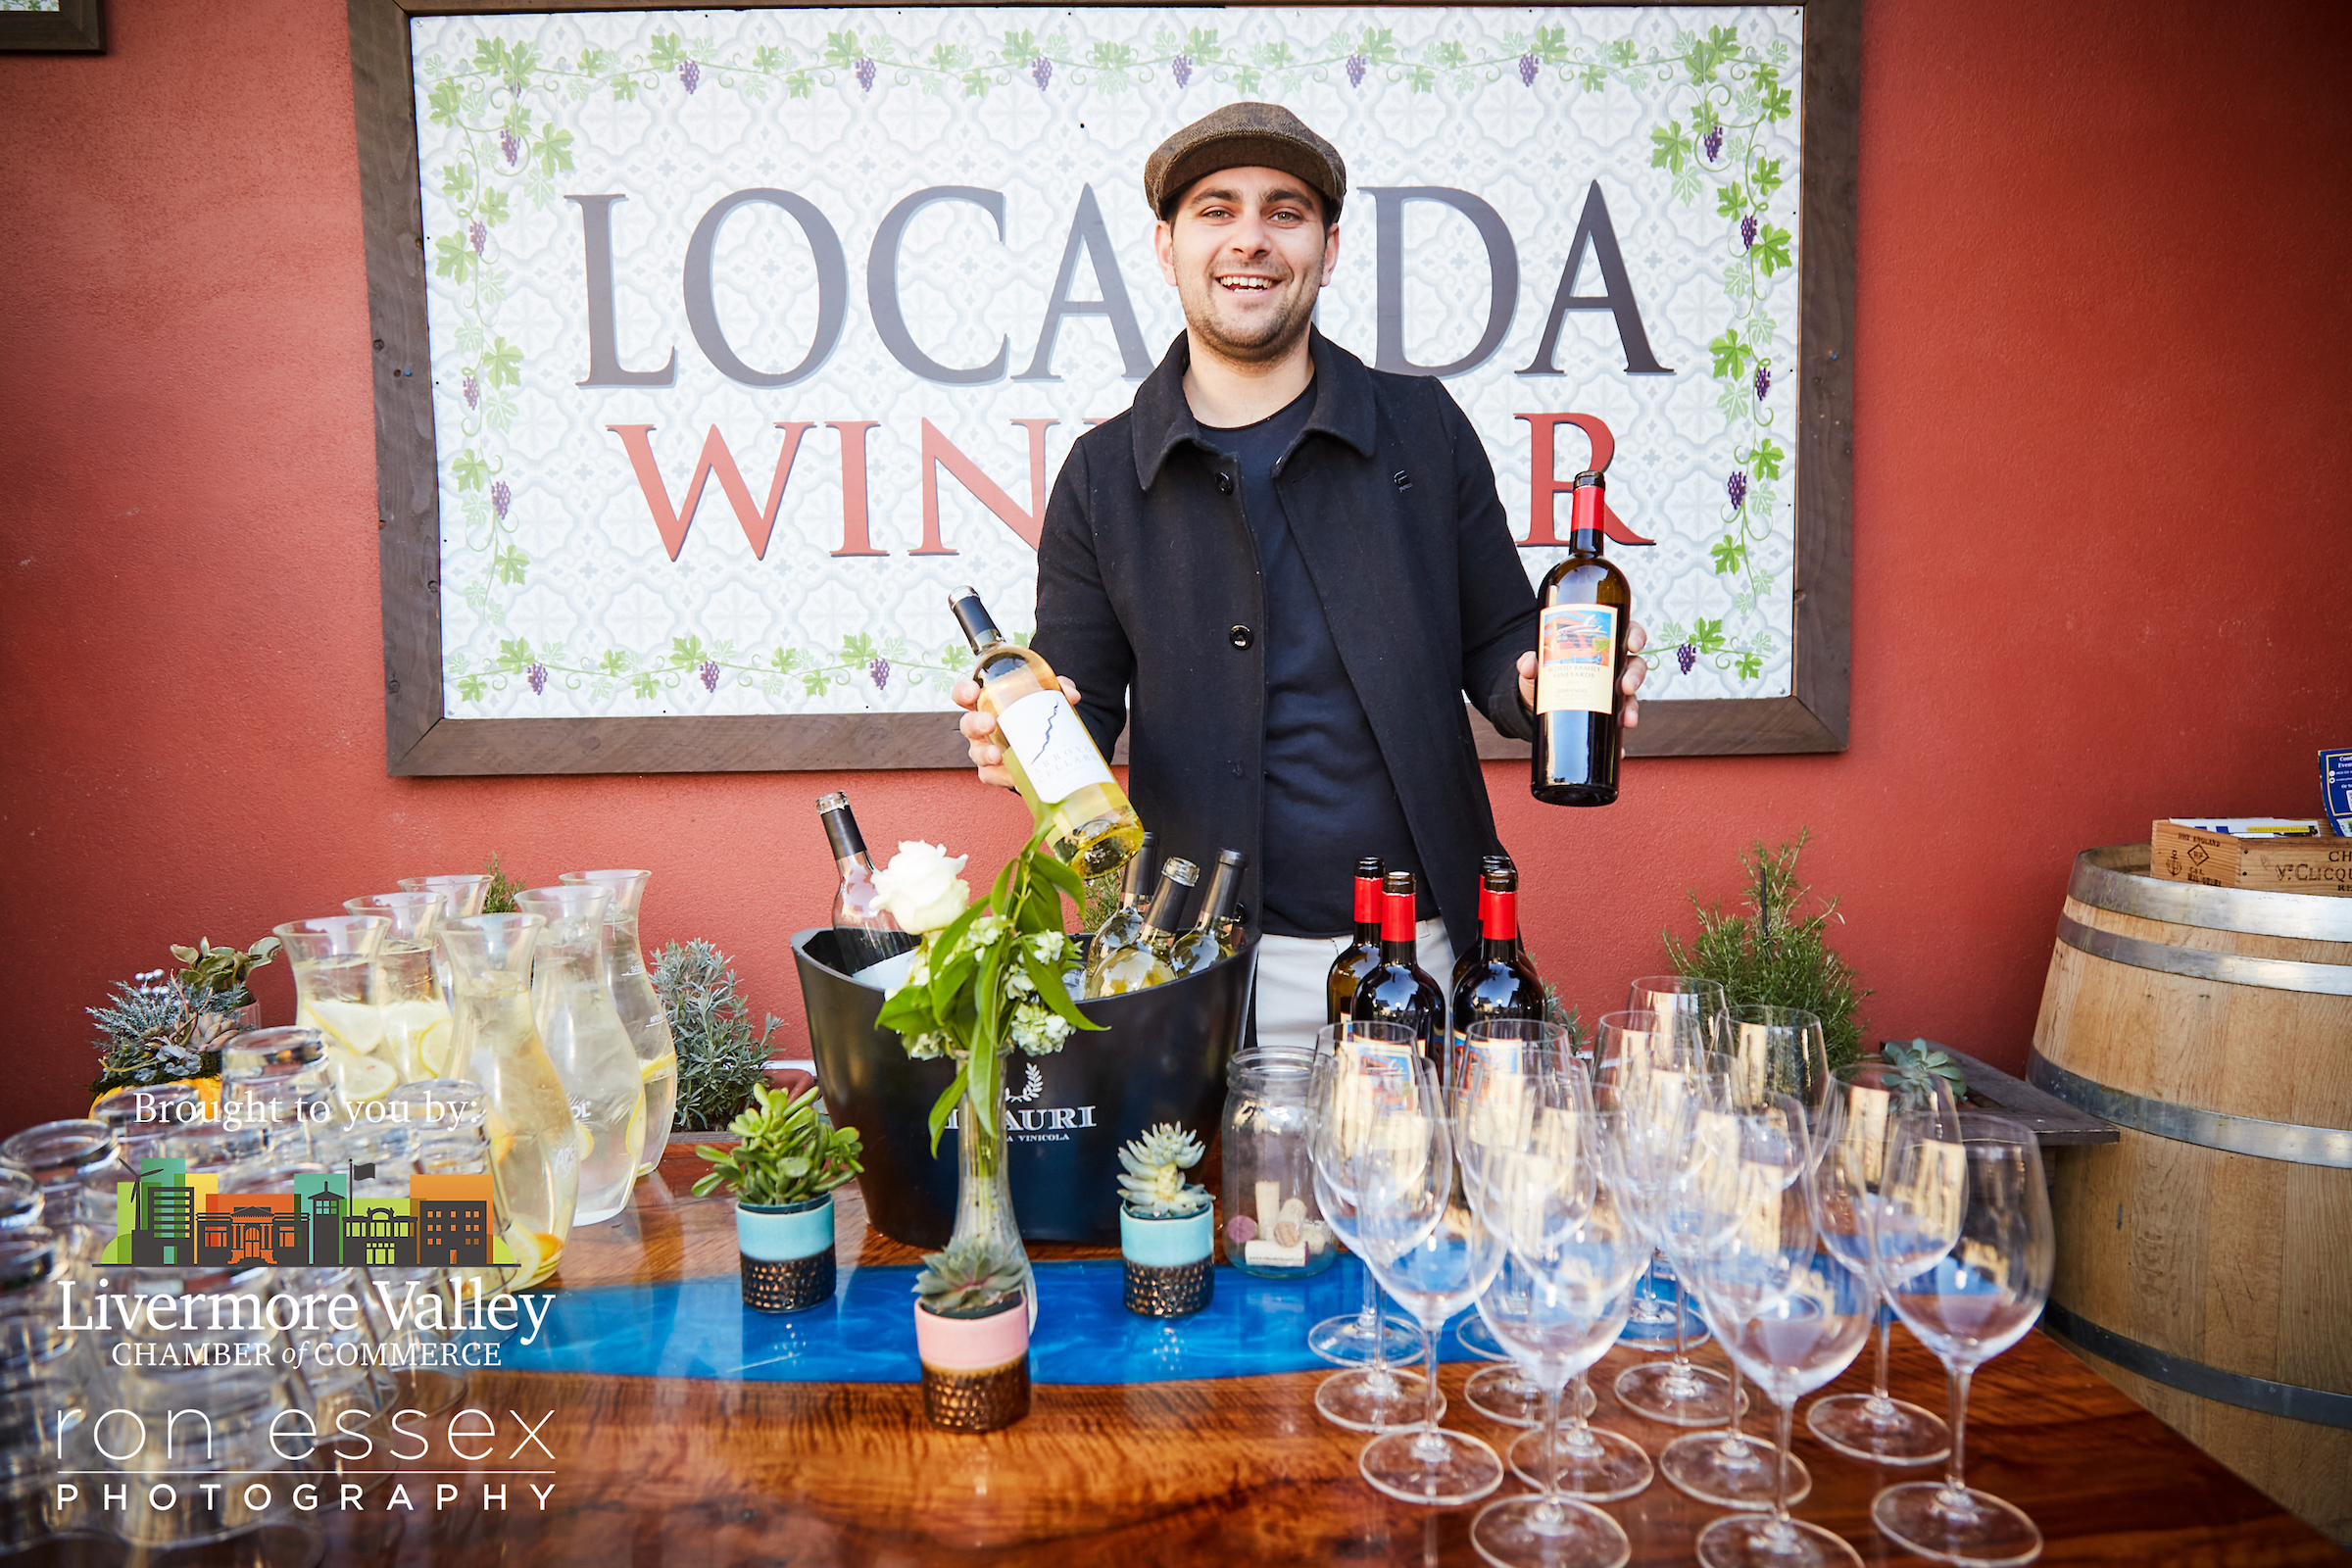 February After Hours Business Mixer Hosted by Laconda Wine Bar